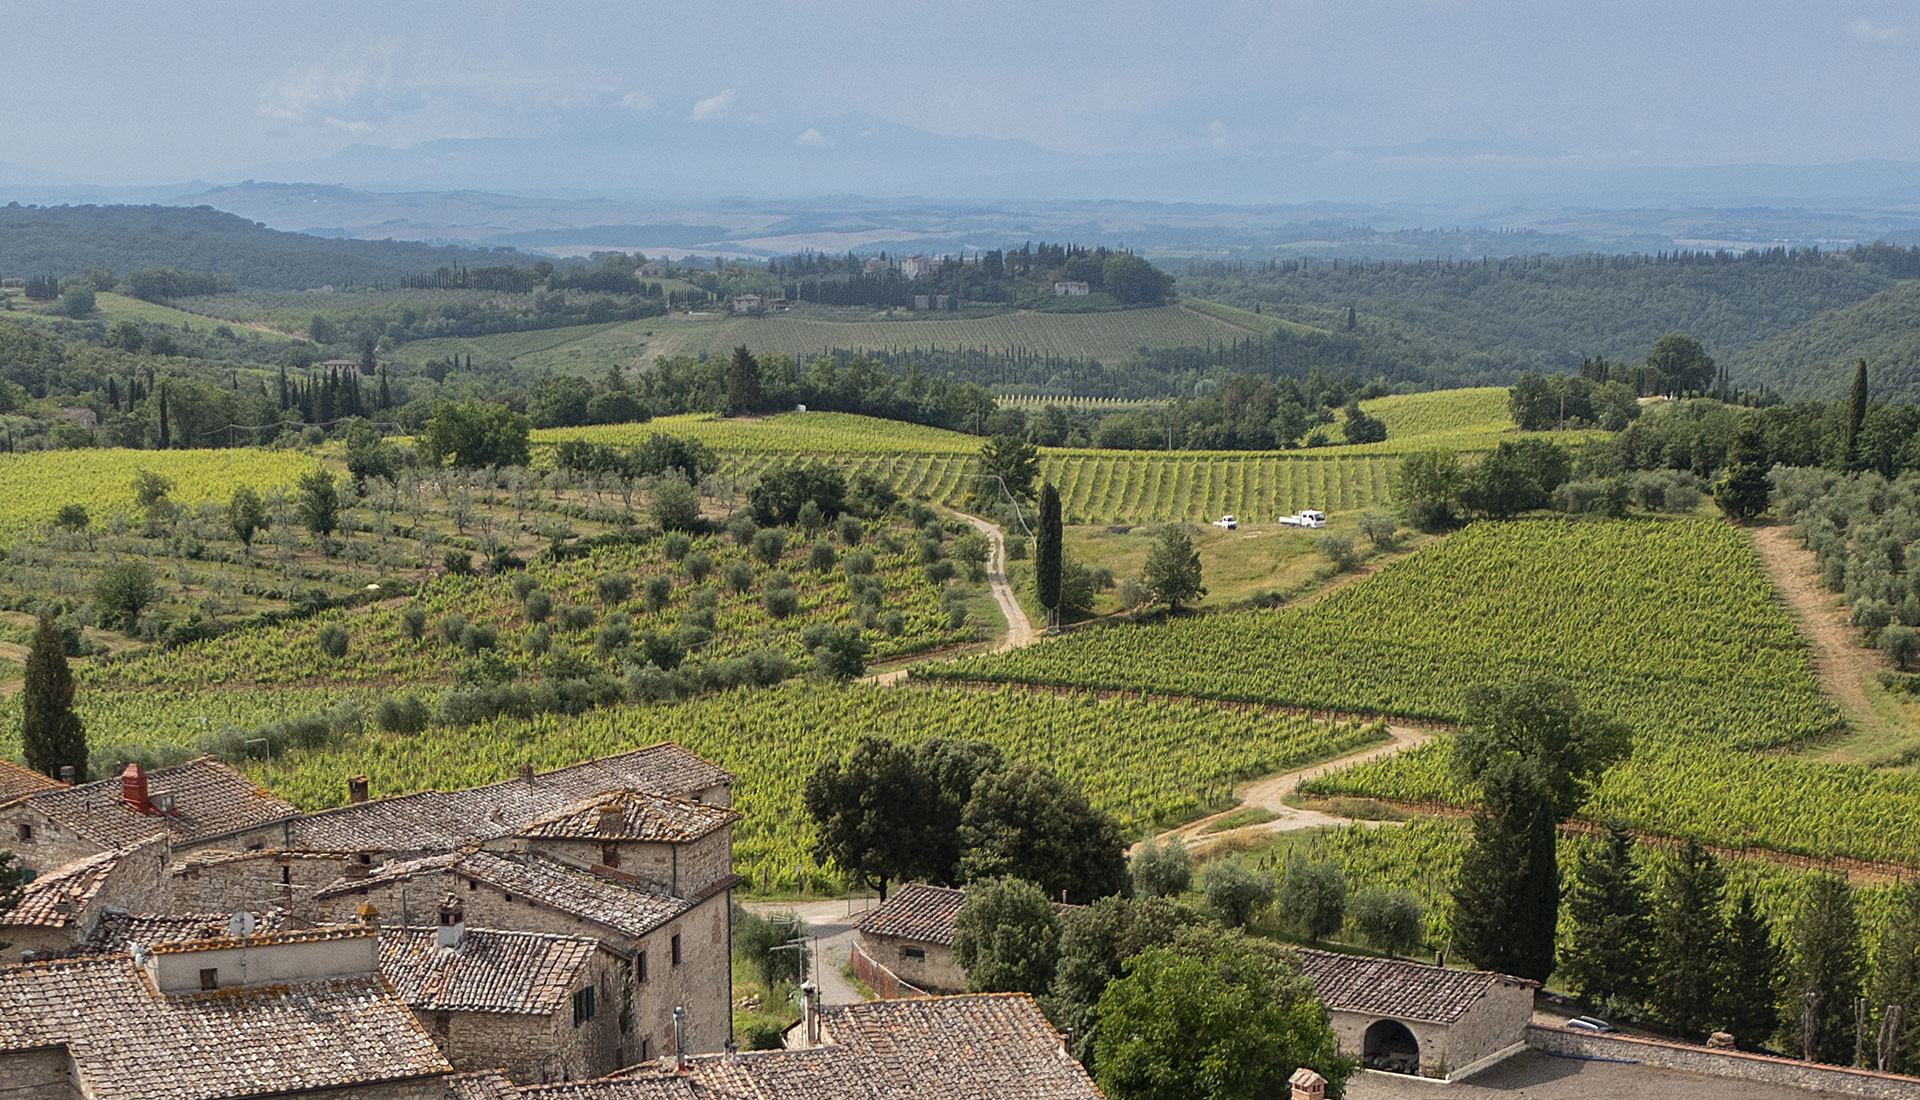 Tourism in Chianti in Italy